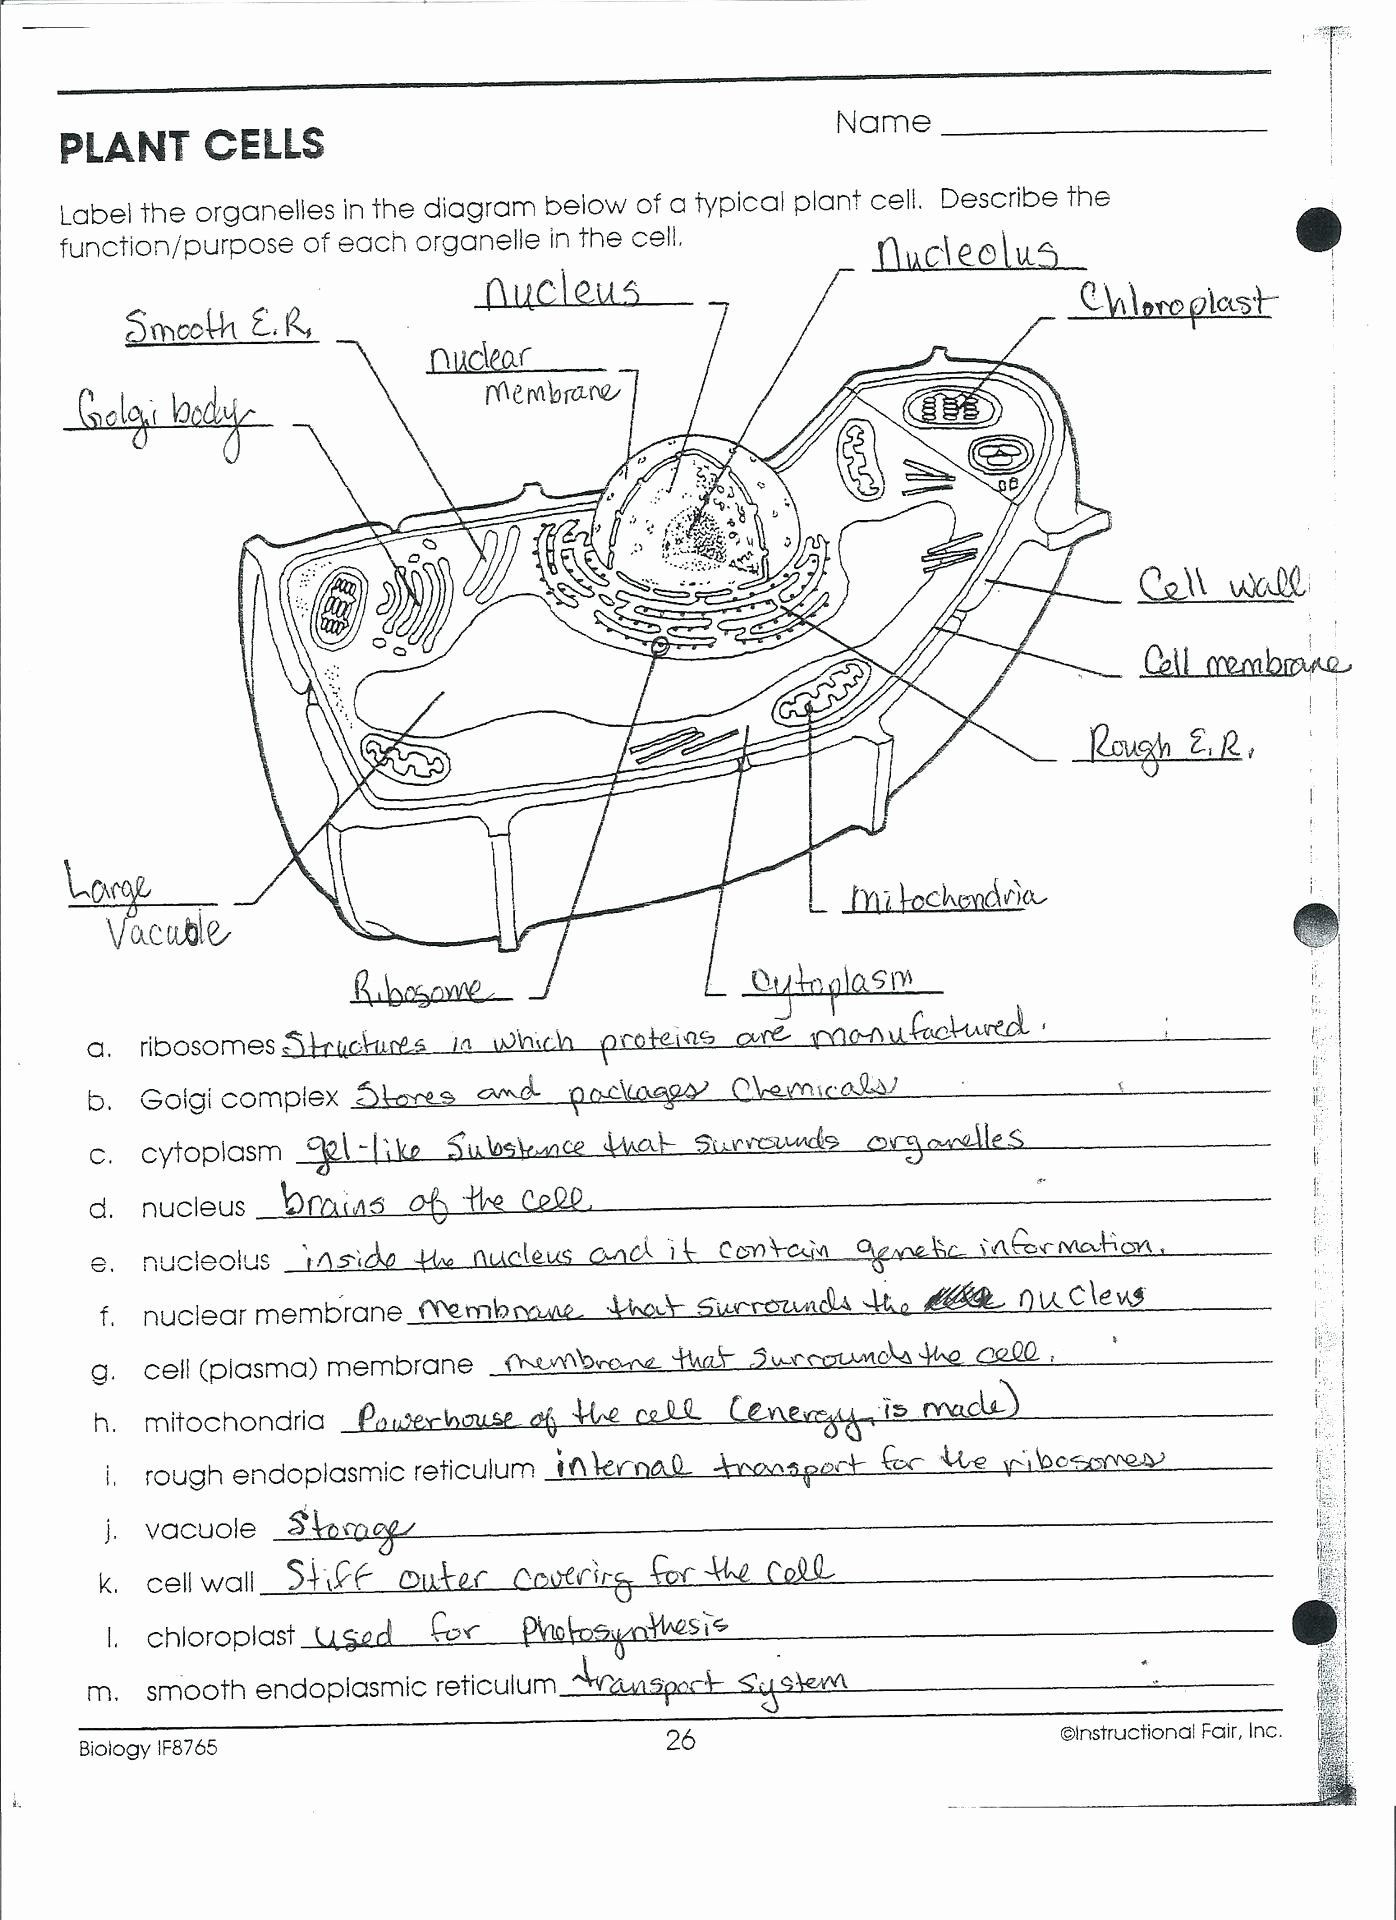 Cell Membrane Images Worksheet Answers 50 Animal Cell Worksheet Answers In 2020